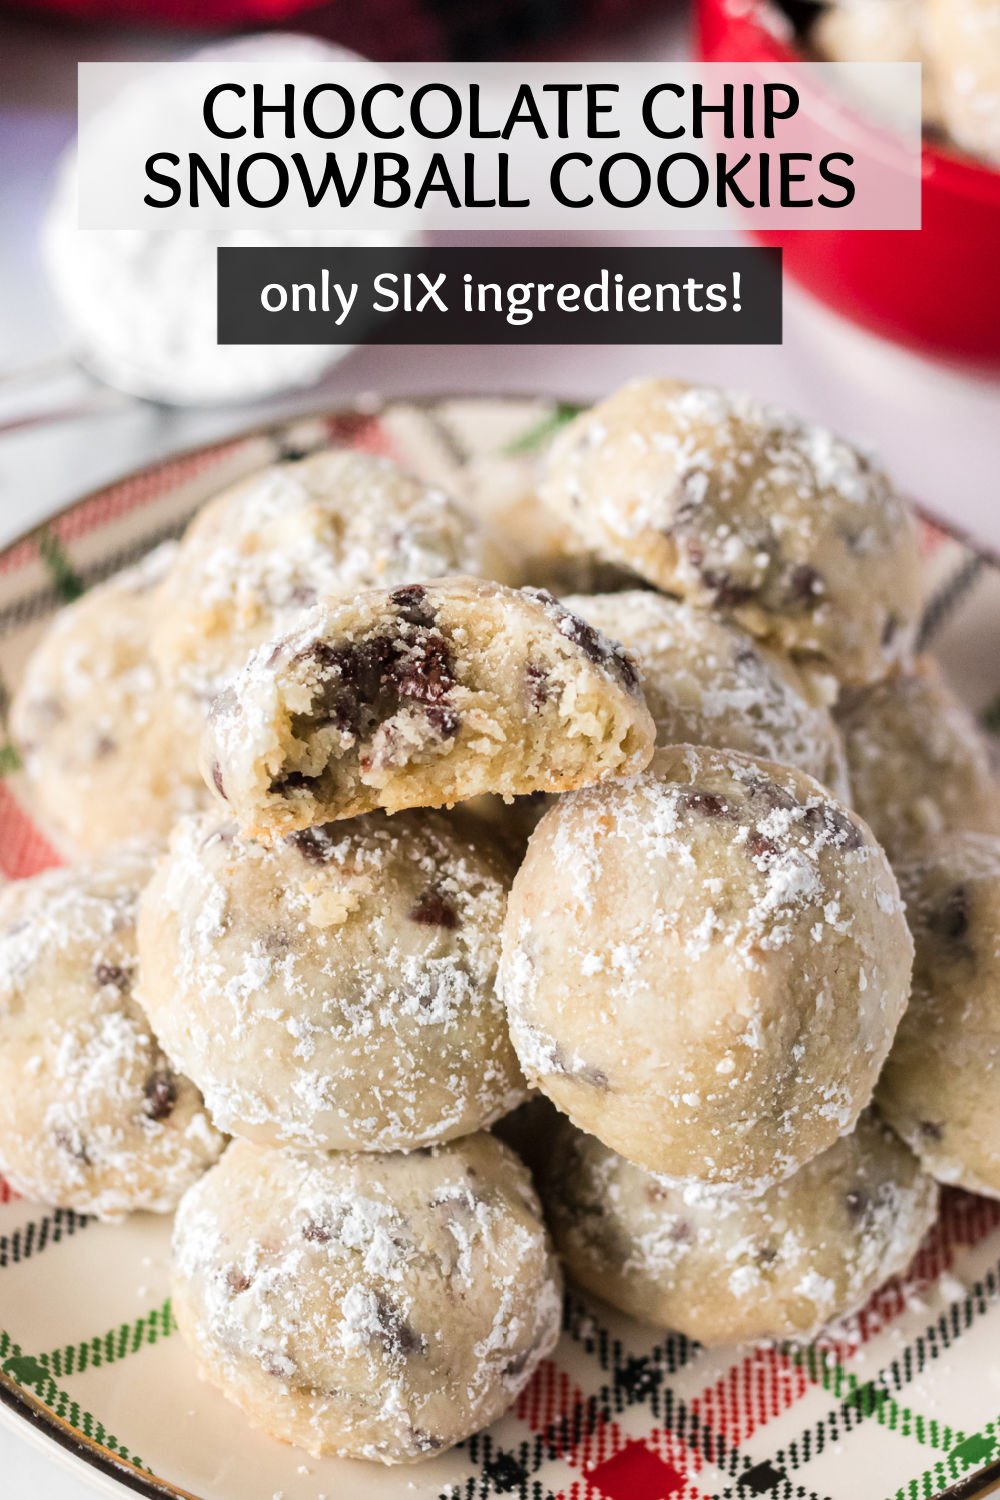 Chocolate Chip Snowball Cookies are a buttery, tender, bite-sized cookie filled with mini chocolate chips. Because they only require six ingredients, no mixer, and they make a large batch, you'll want this easy cookie recipe in your holiday rotation.  Though they go by many names (Chocolate Chip Butterballs, Russian Tea Cakes, Mexican Wedding Cakes), these simple cookies are a favorite around the world. | www.persnicketyplates.com